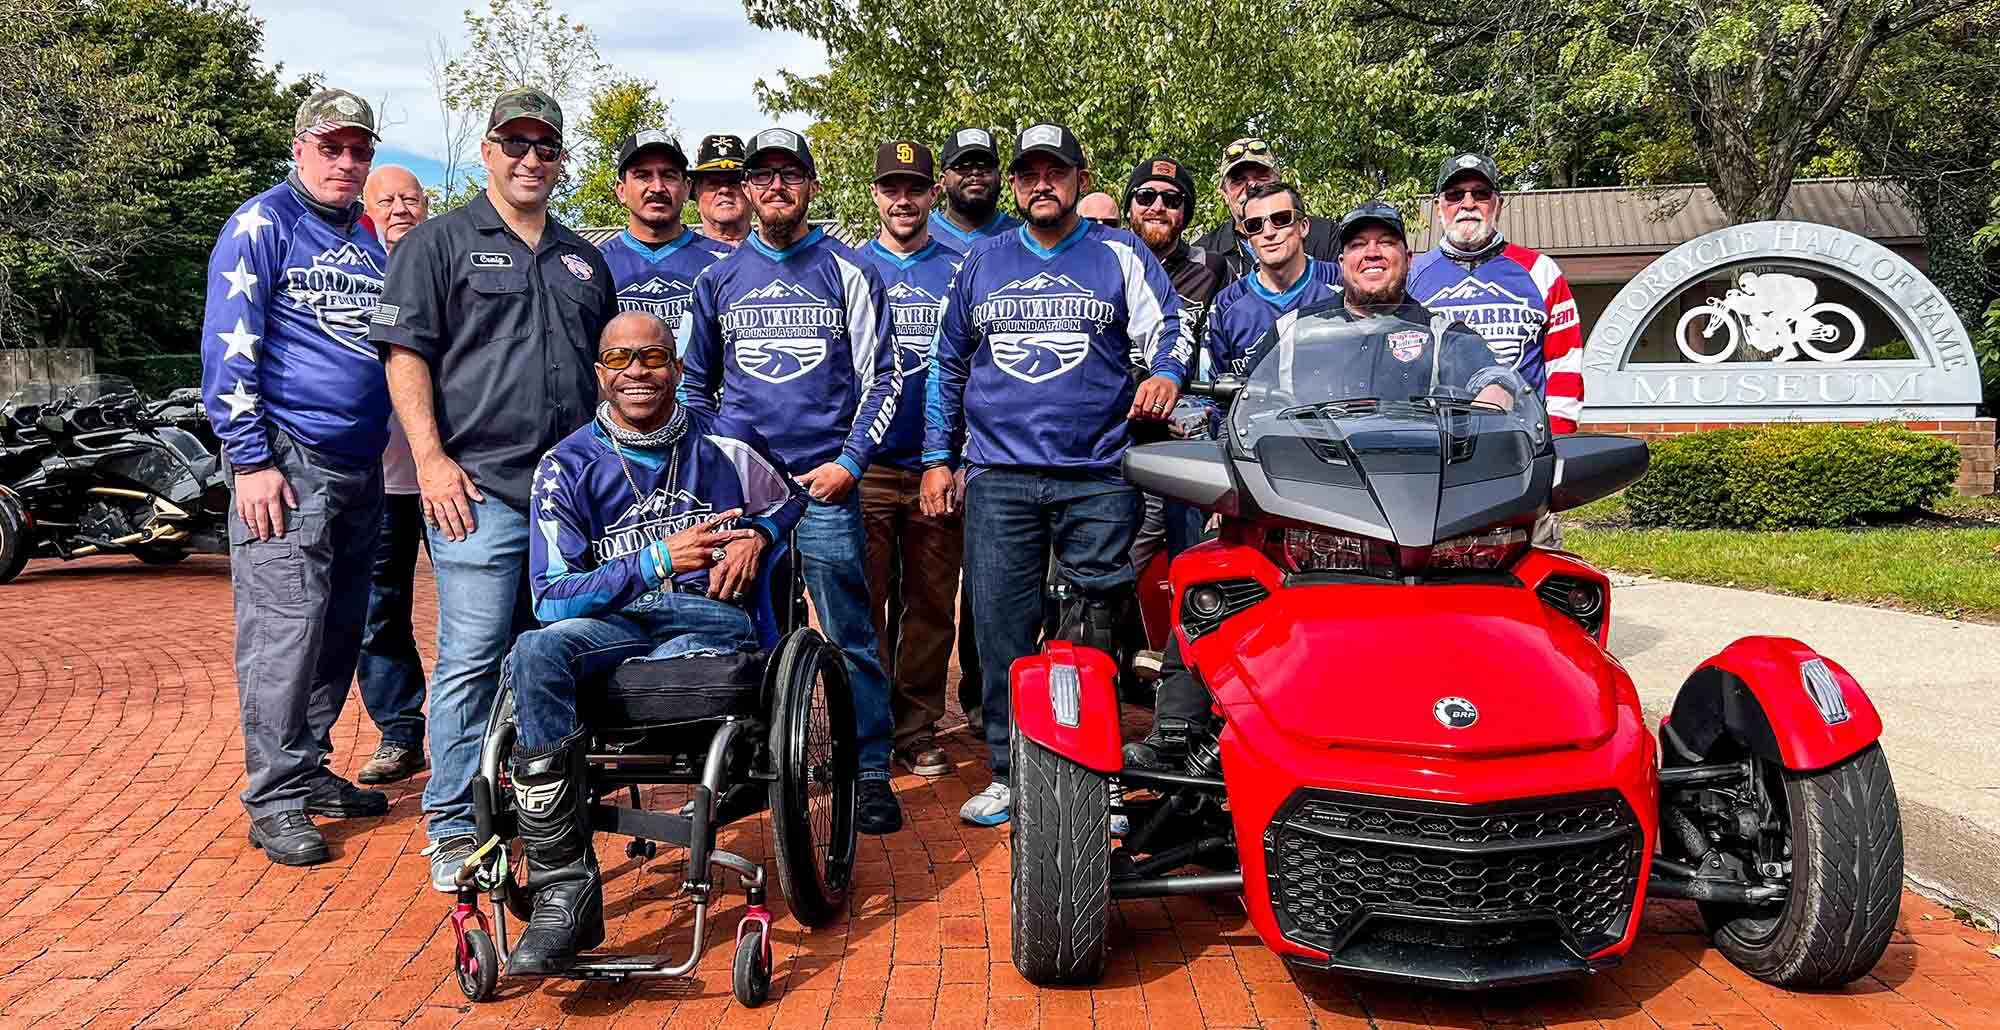 The 2022 Road Warrior Ride, sponsored by Can-Am, ended at the AMA Motorcycle Hall of Fame Museum in Columbus, Ohio.